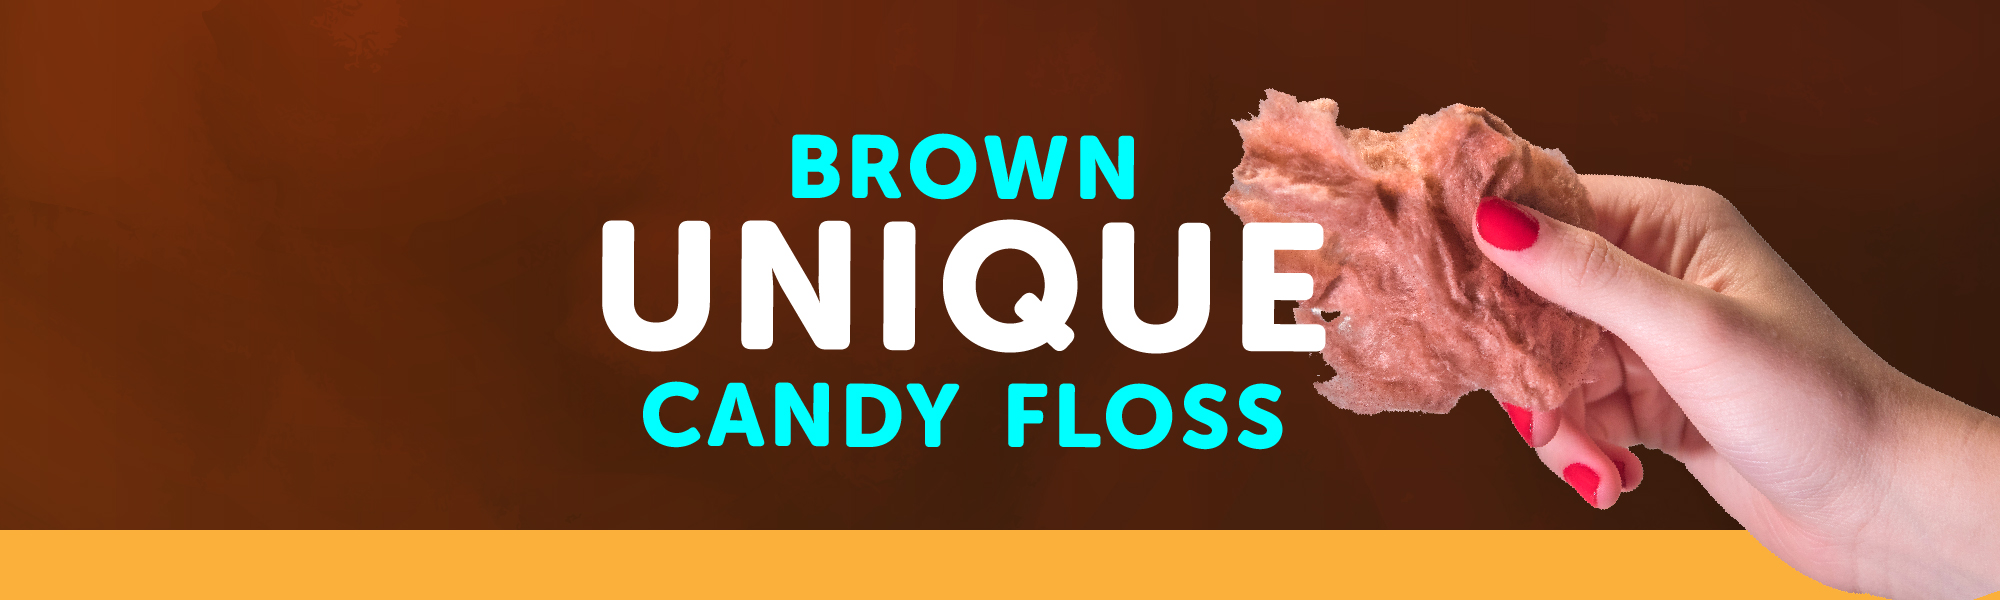 unique brown candy floss. Exclusively offered by Original Bag of Poo